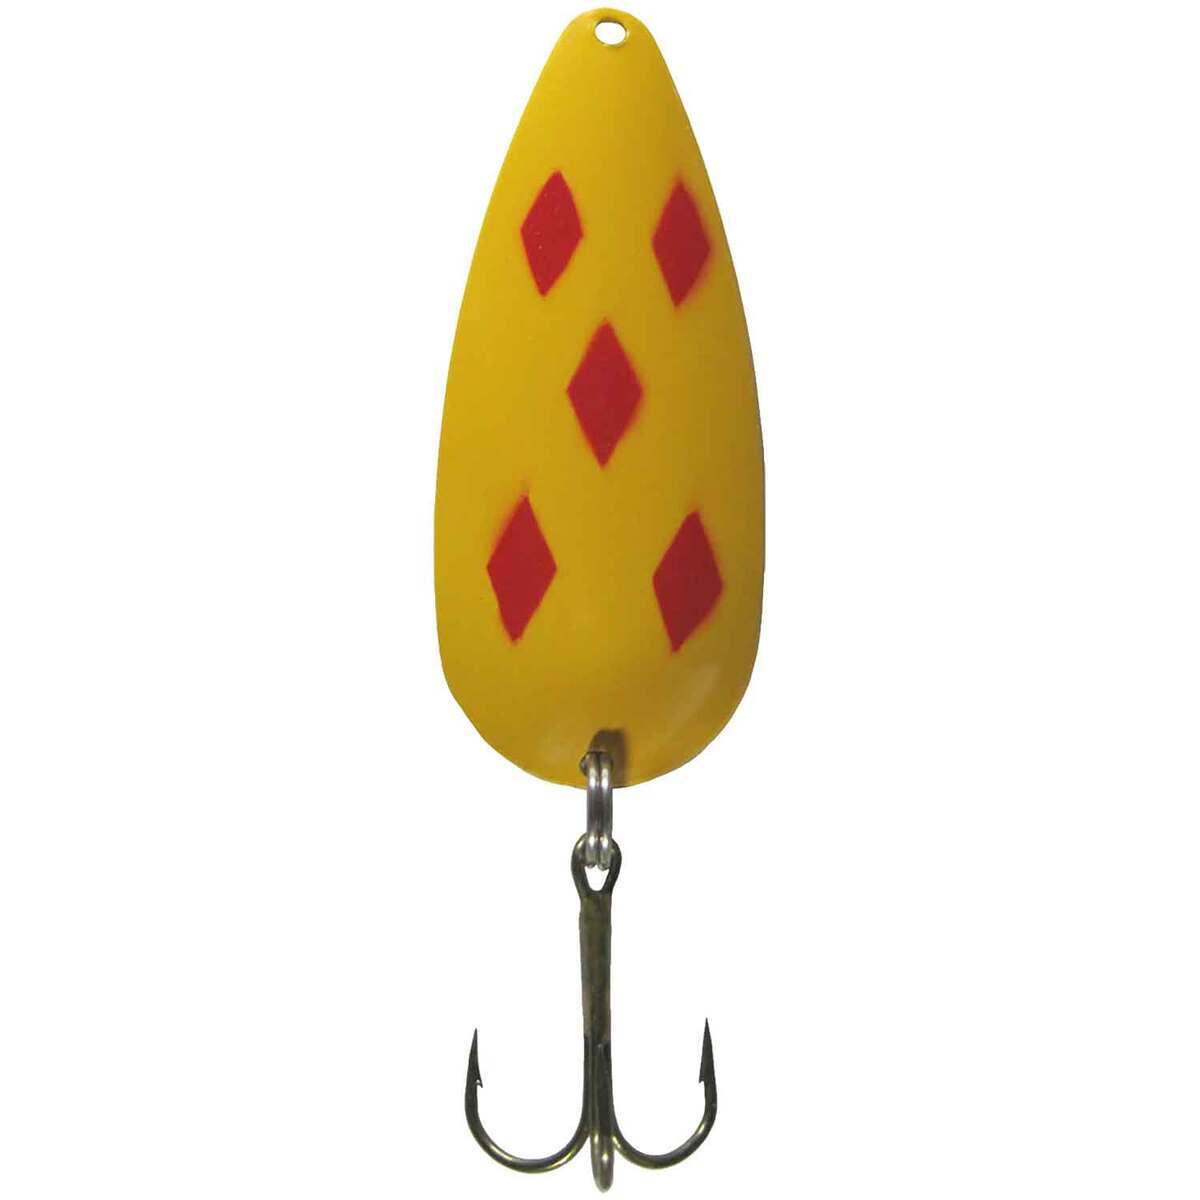 K & E Tackle Red/White Treble Hook Casting Spoon